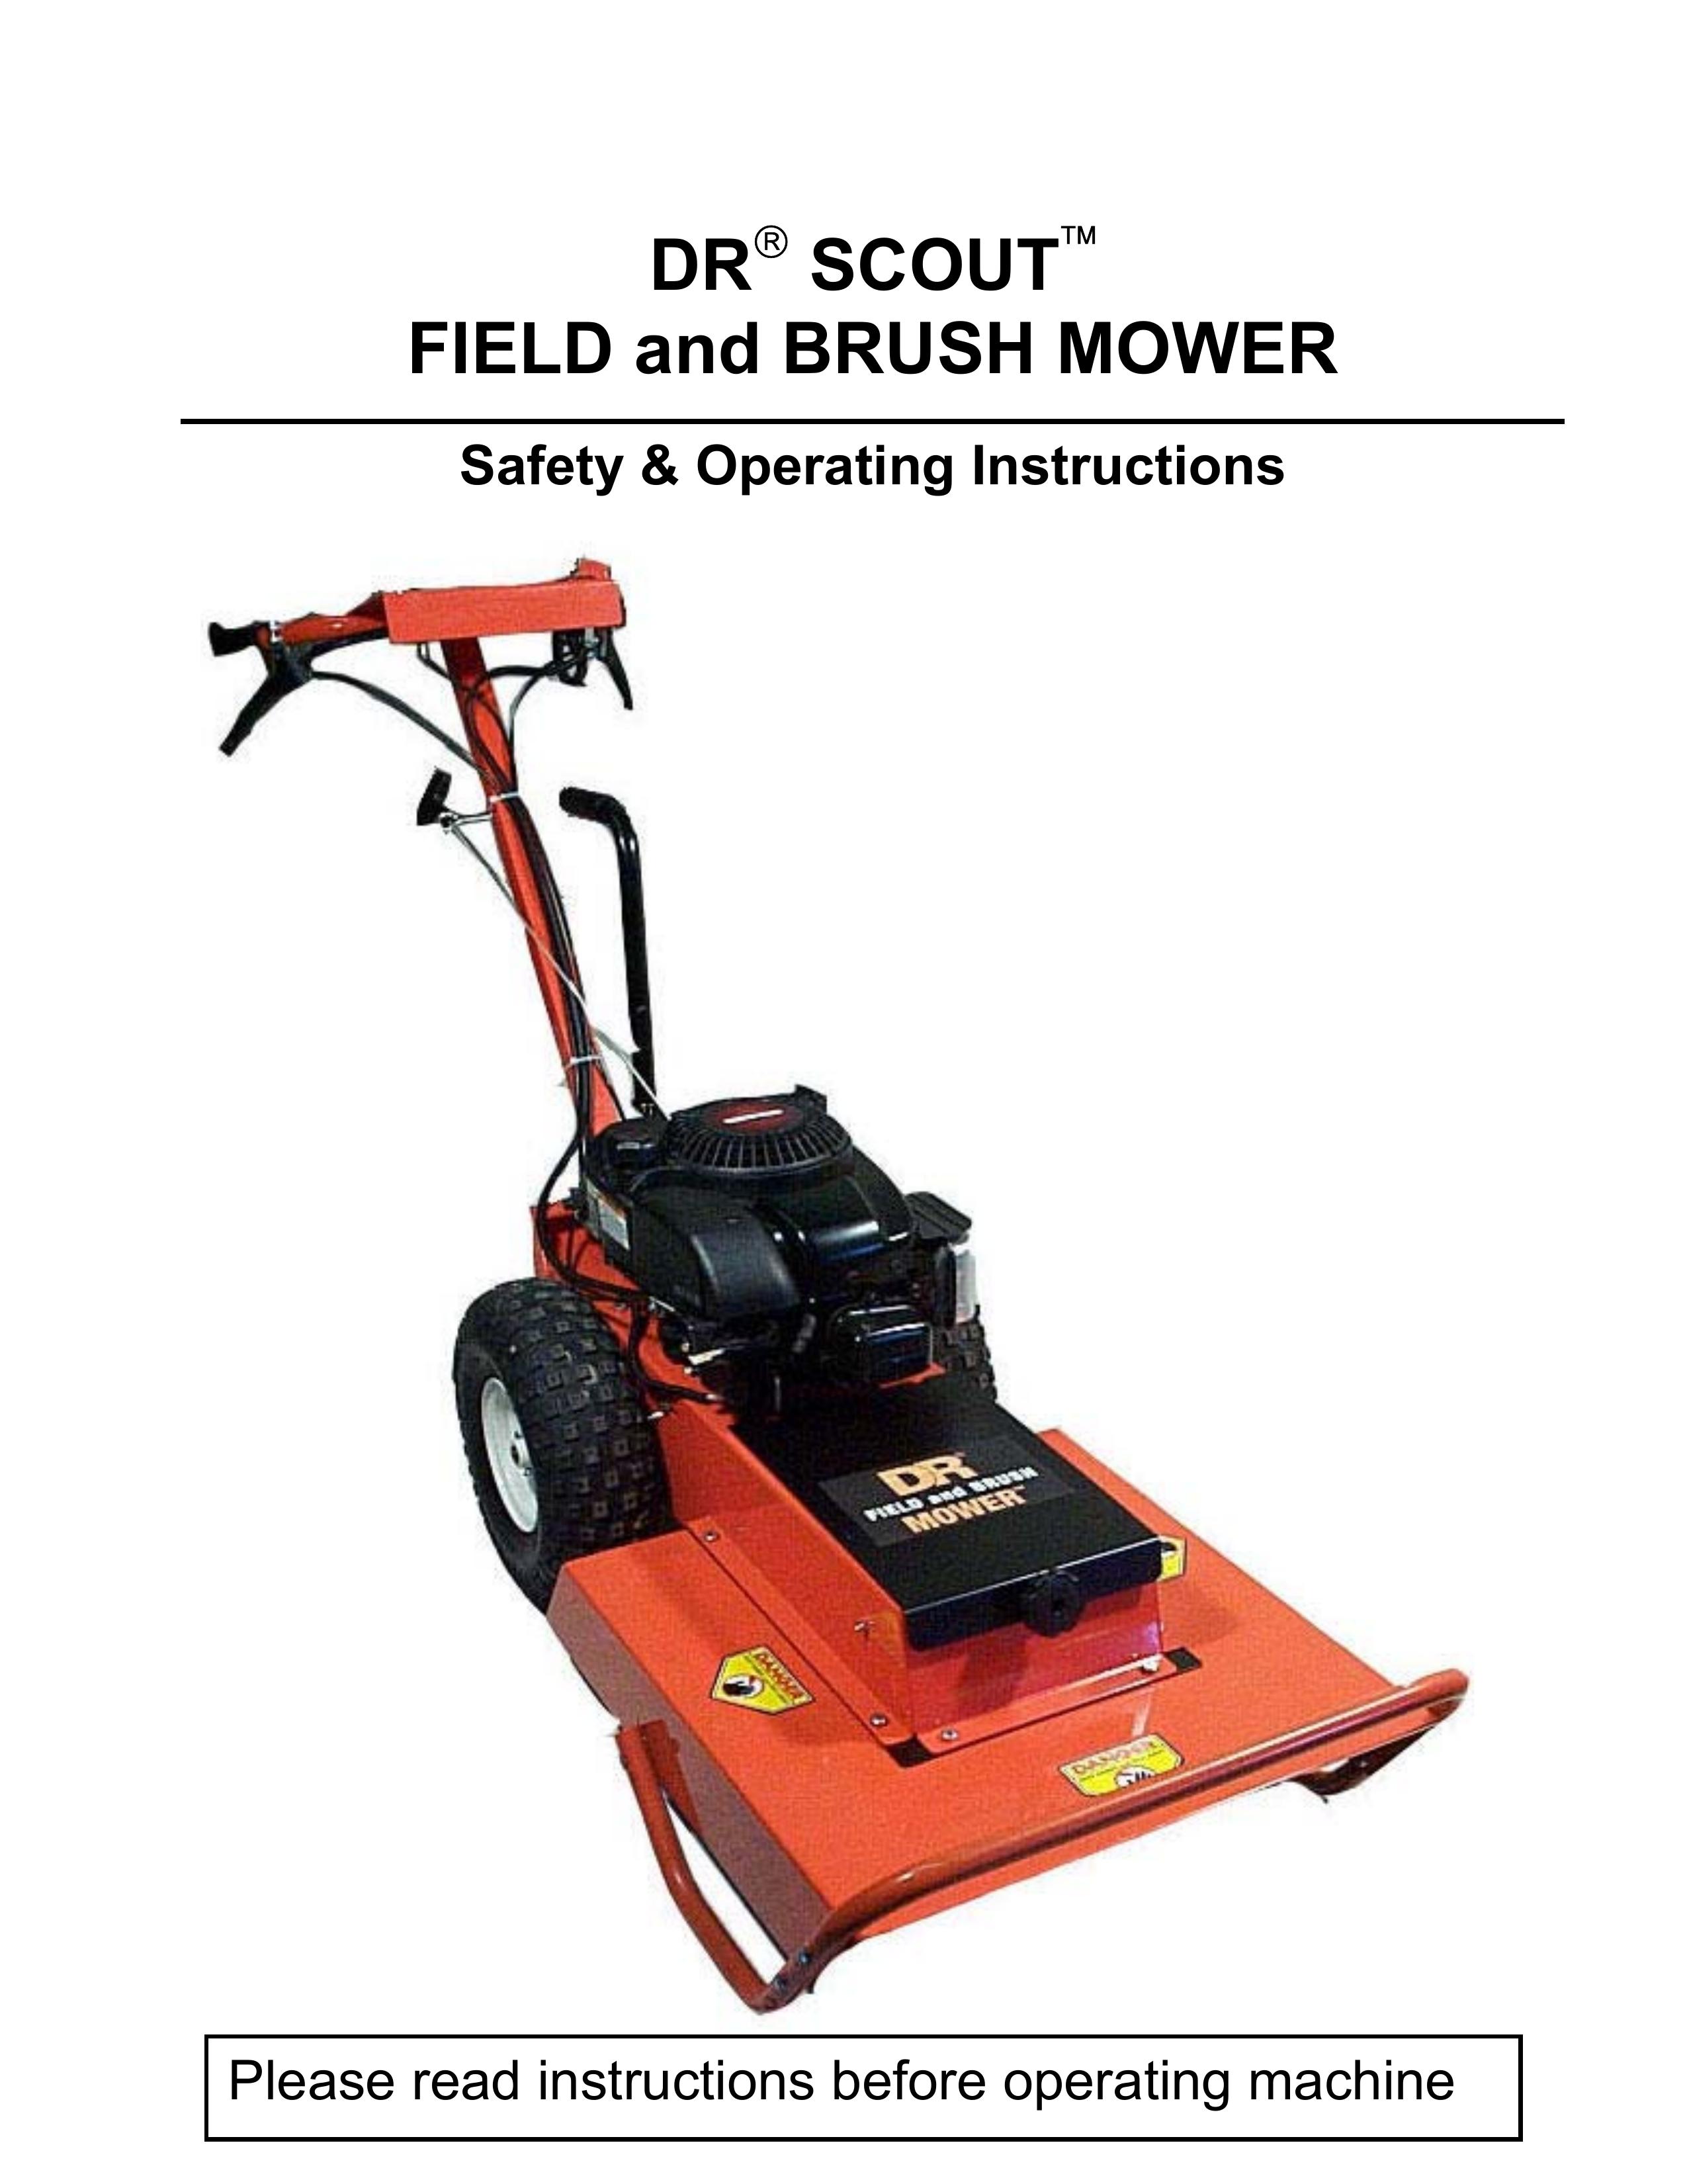 Country Home Products DR SCOUT FIELD and BRUSH MOWER Lawn Mower User Manual